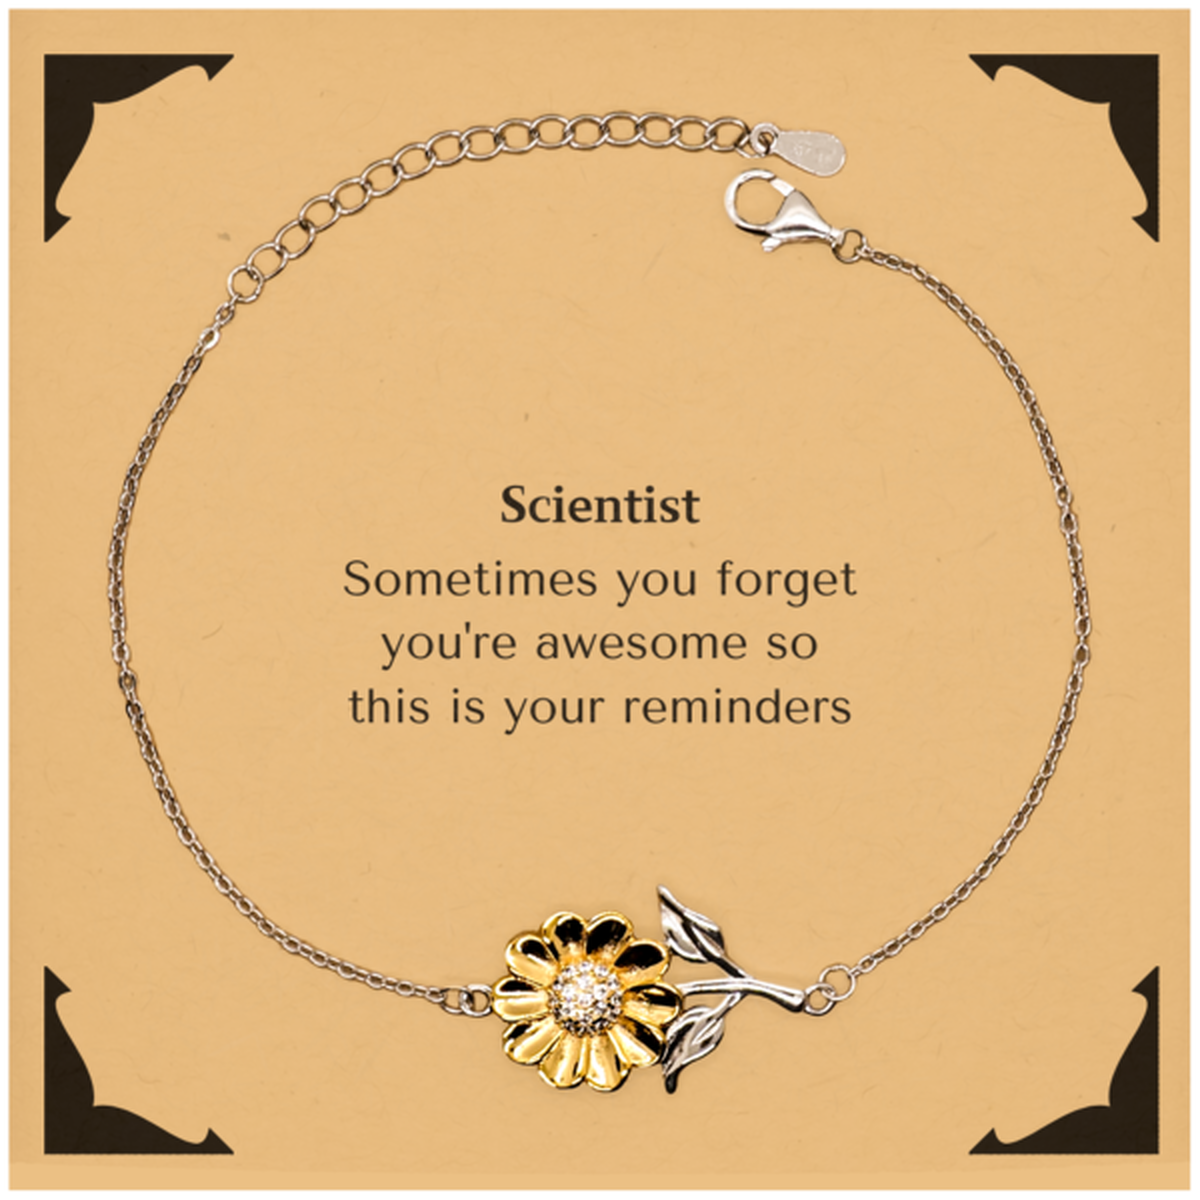 Sentimental Scientist Sunflower Bracelet, Scientist Sometimes you forget you're awesome so this is your reminders, Graduation Christmas Birthday Gifts for Scientist, Men, Women, Coworkers